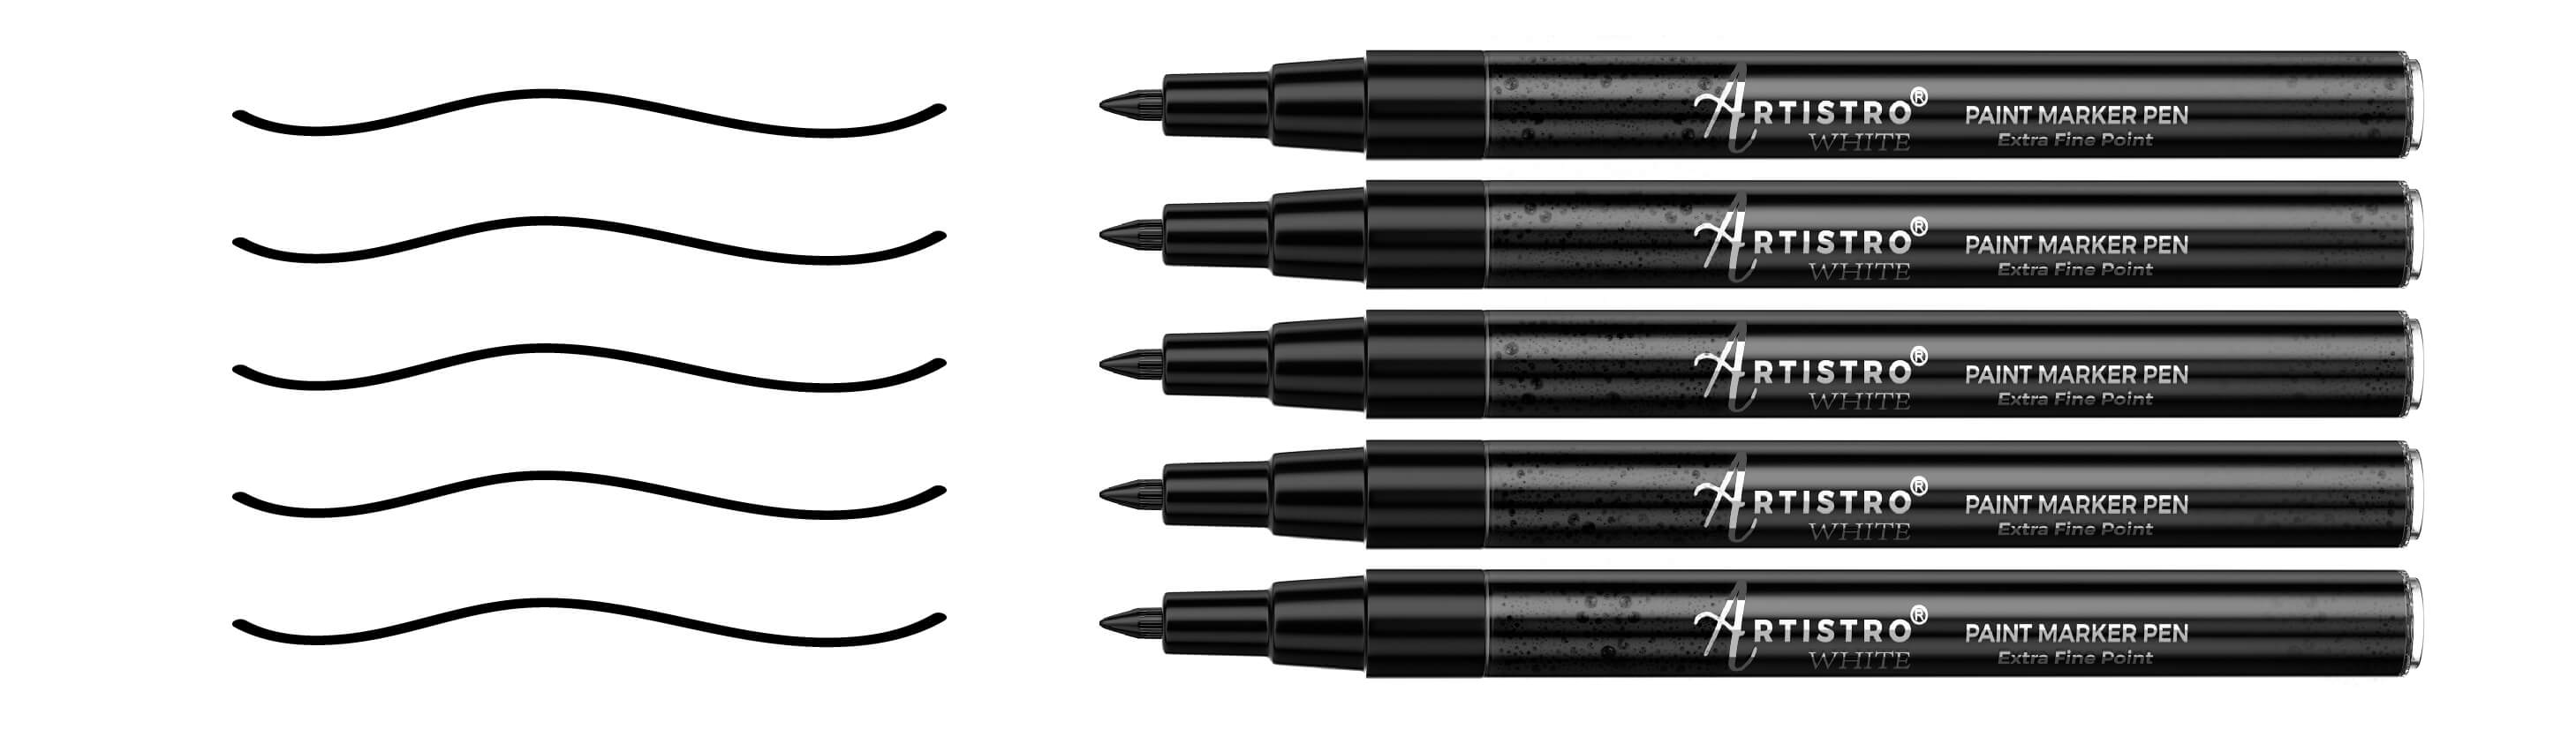 Artistro Black Paint Markers, Extra Fine Tip, 5 Count